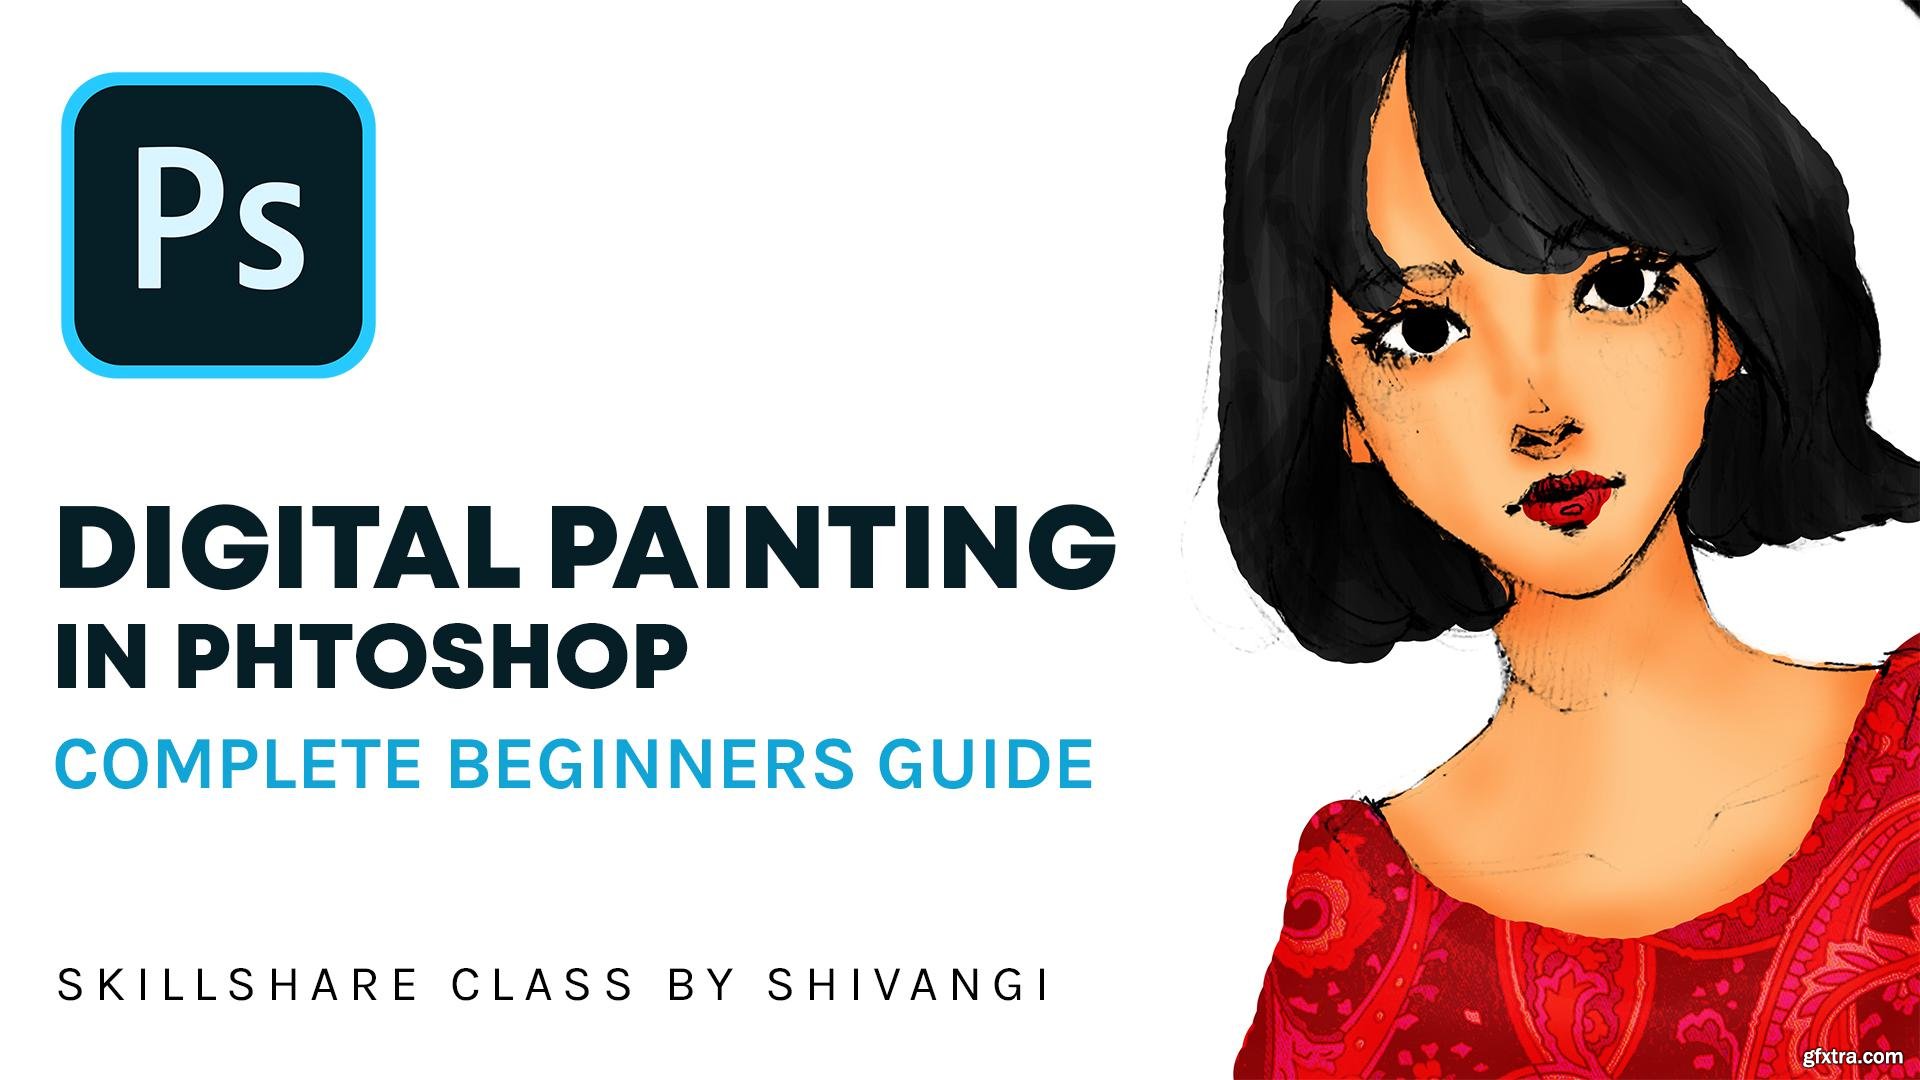 beginner guide to digital painting in photoshop download pdf